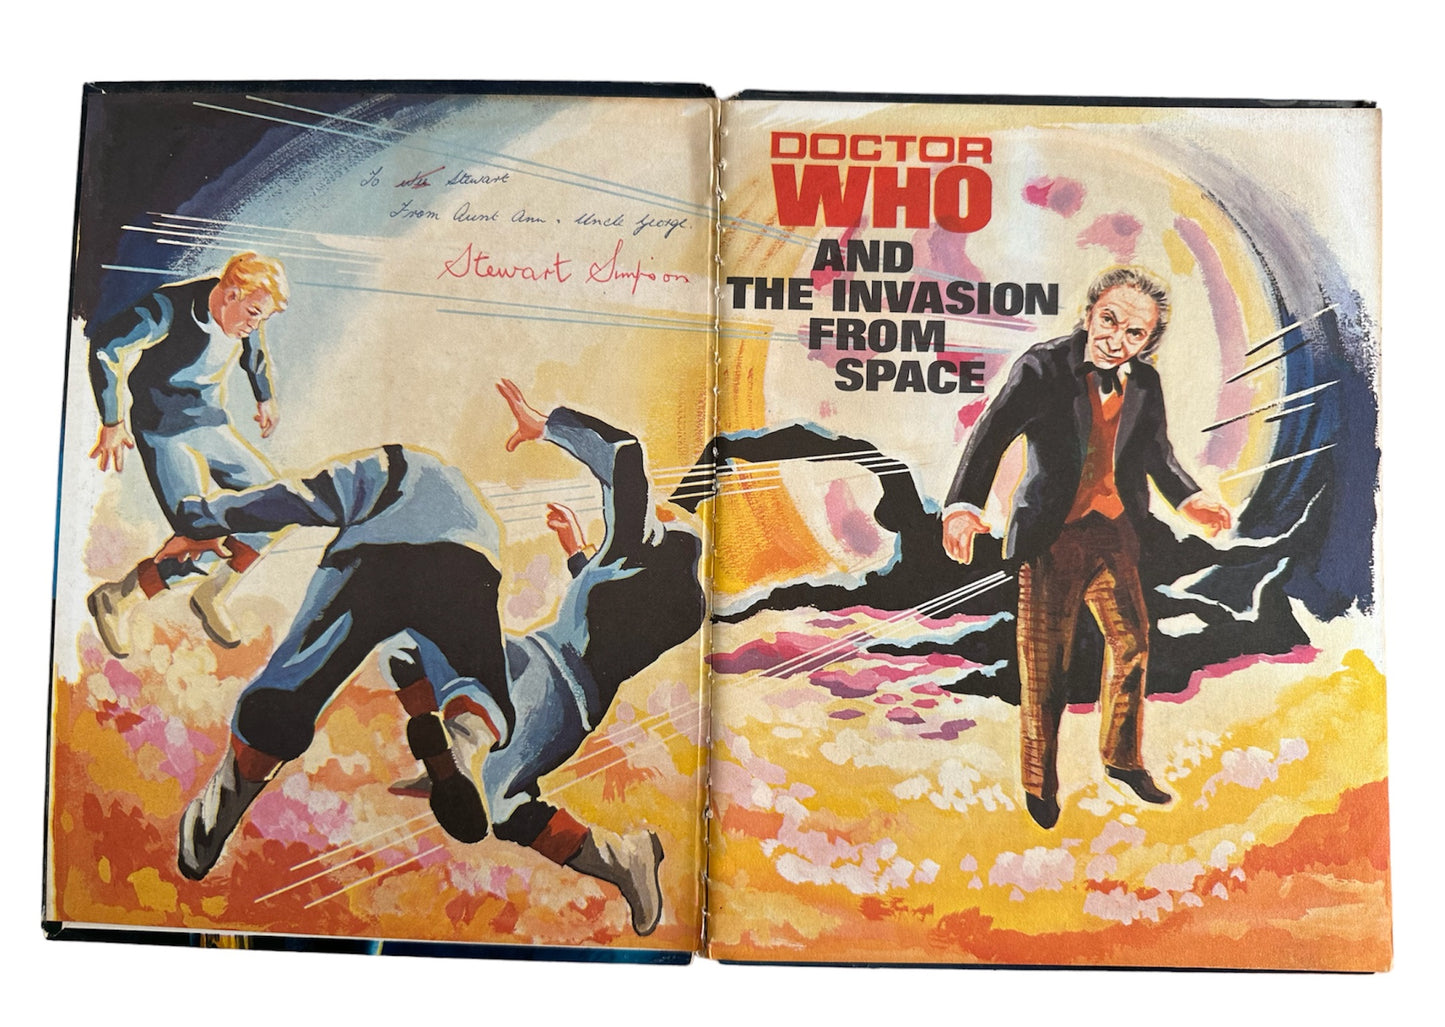 Vintage Doctor Who And The Invasion From Space Annual 1966 William Hartnell as the Dr. - Good Condition Very Rare Hardback Book.